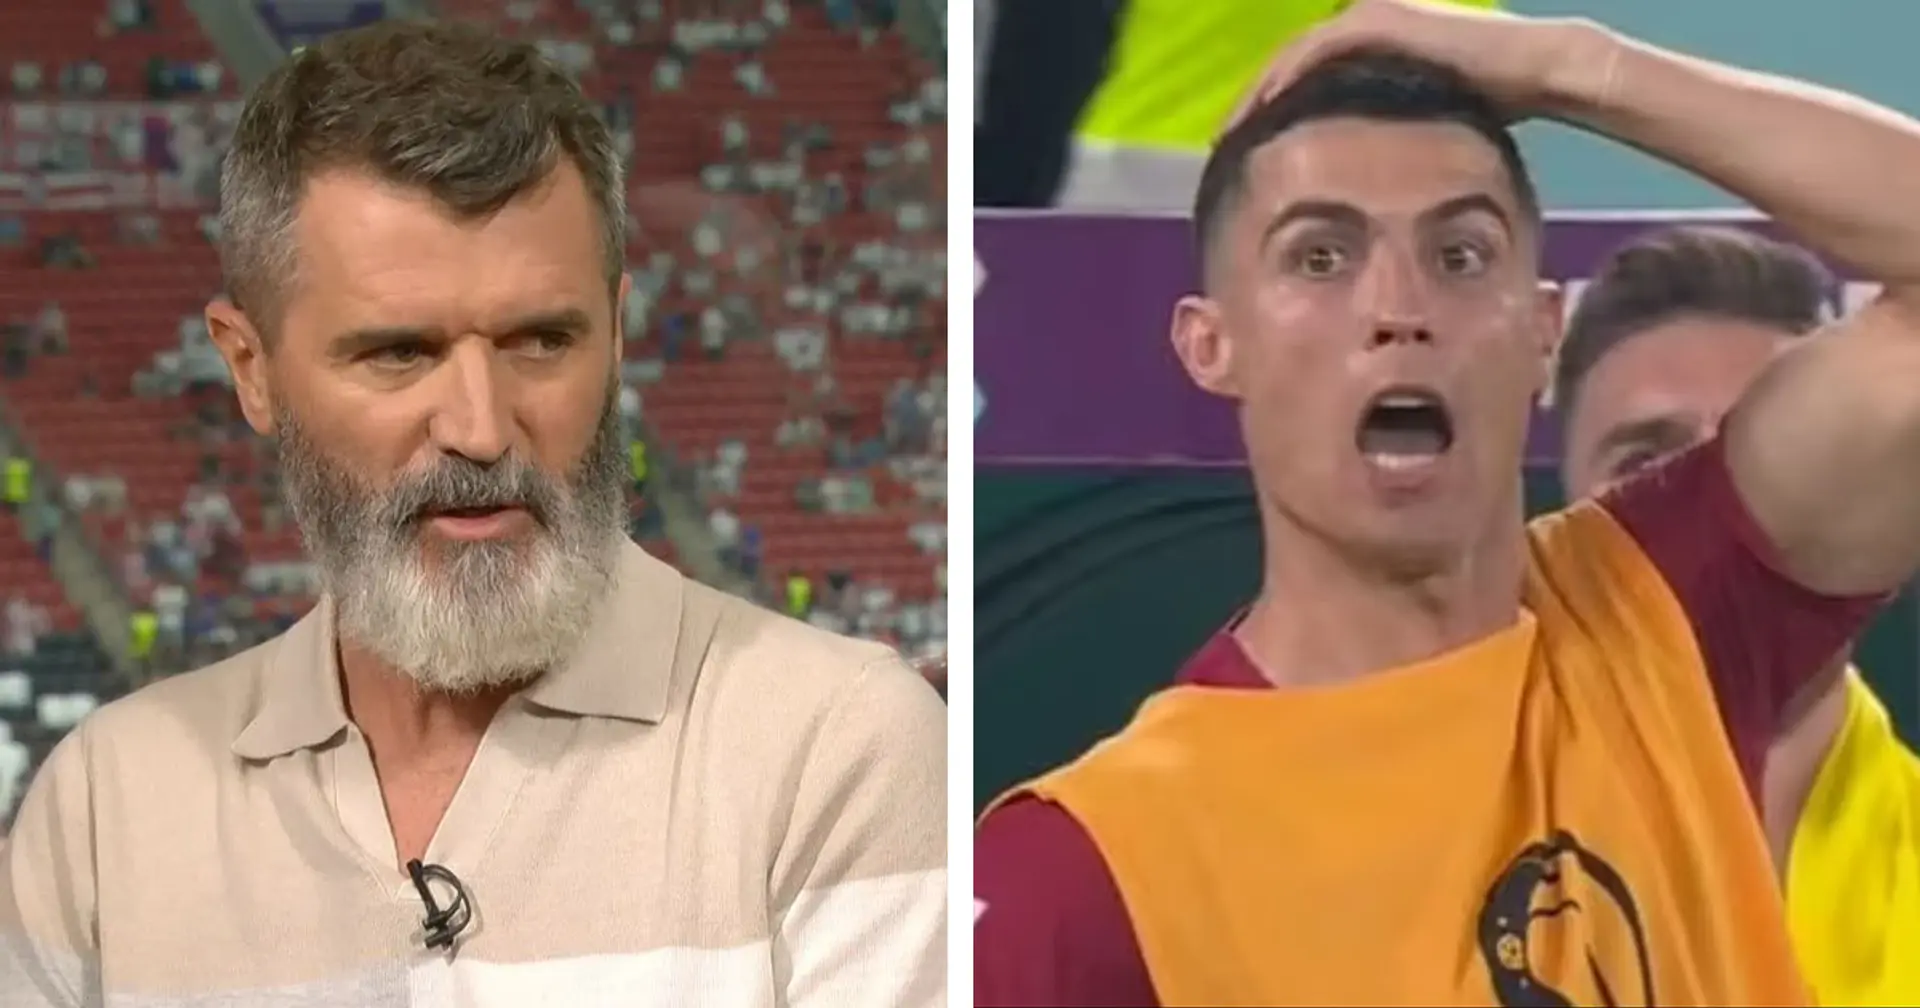 'He's had a call that Newcastle are in for him': Roy Keane reacts to Ronaldo's meme-like shocked face vs Ghana